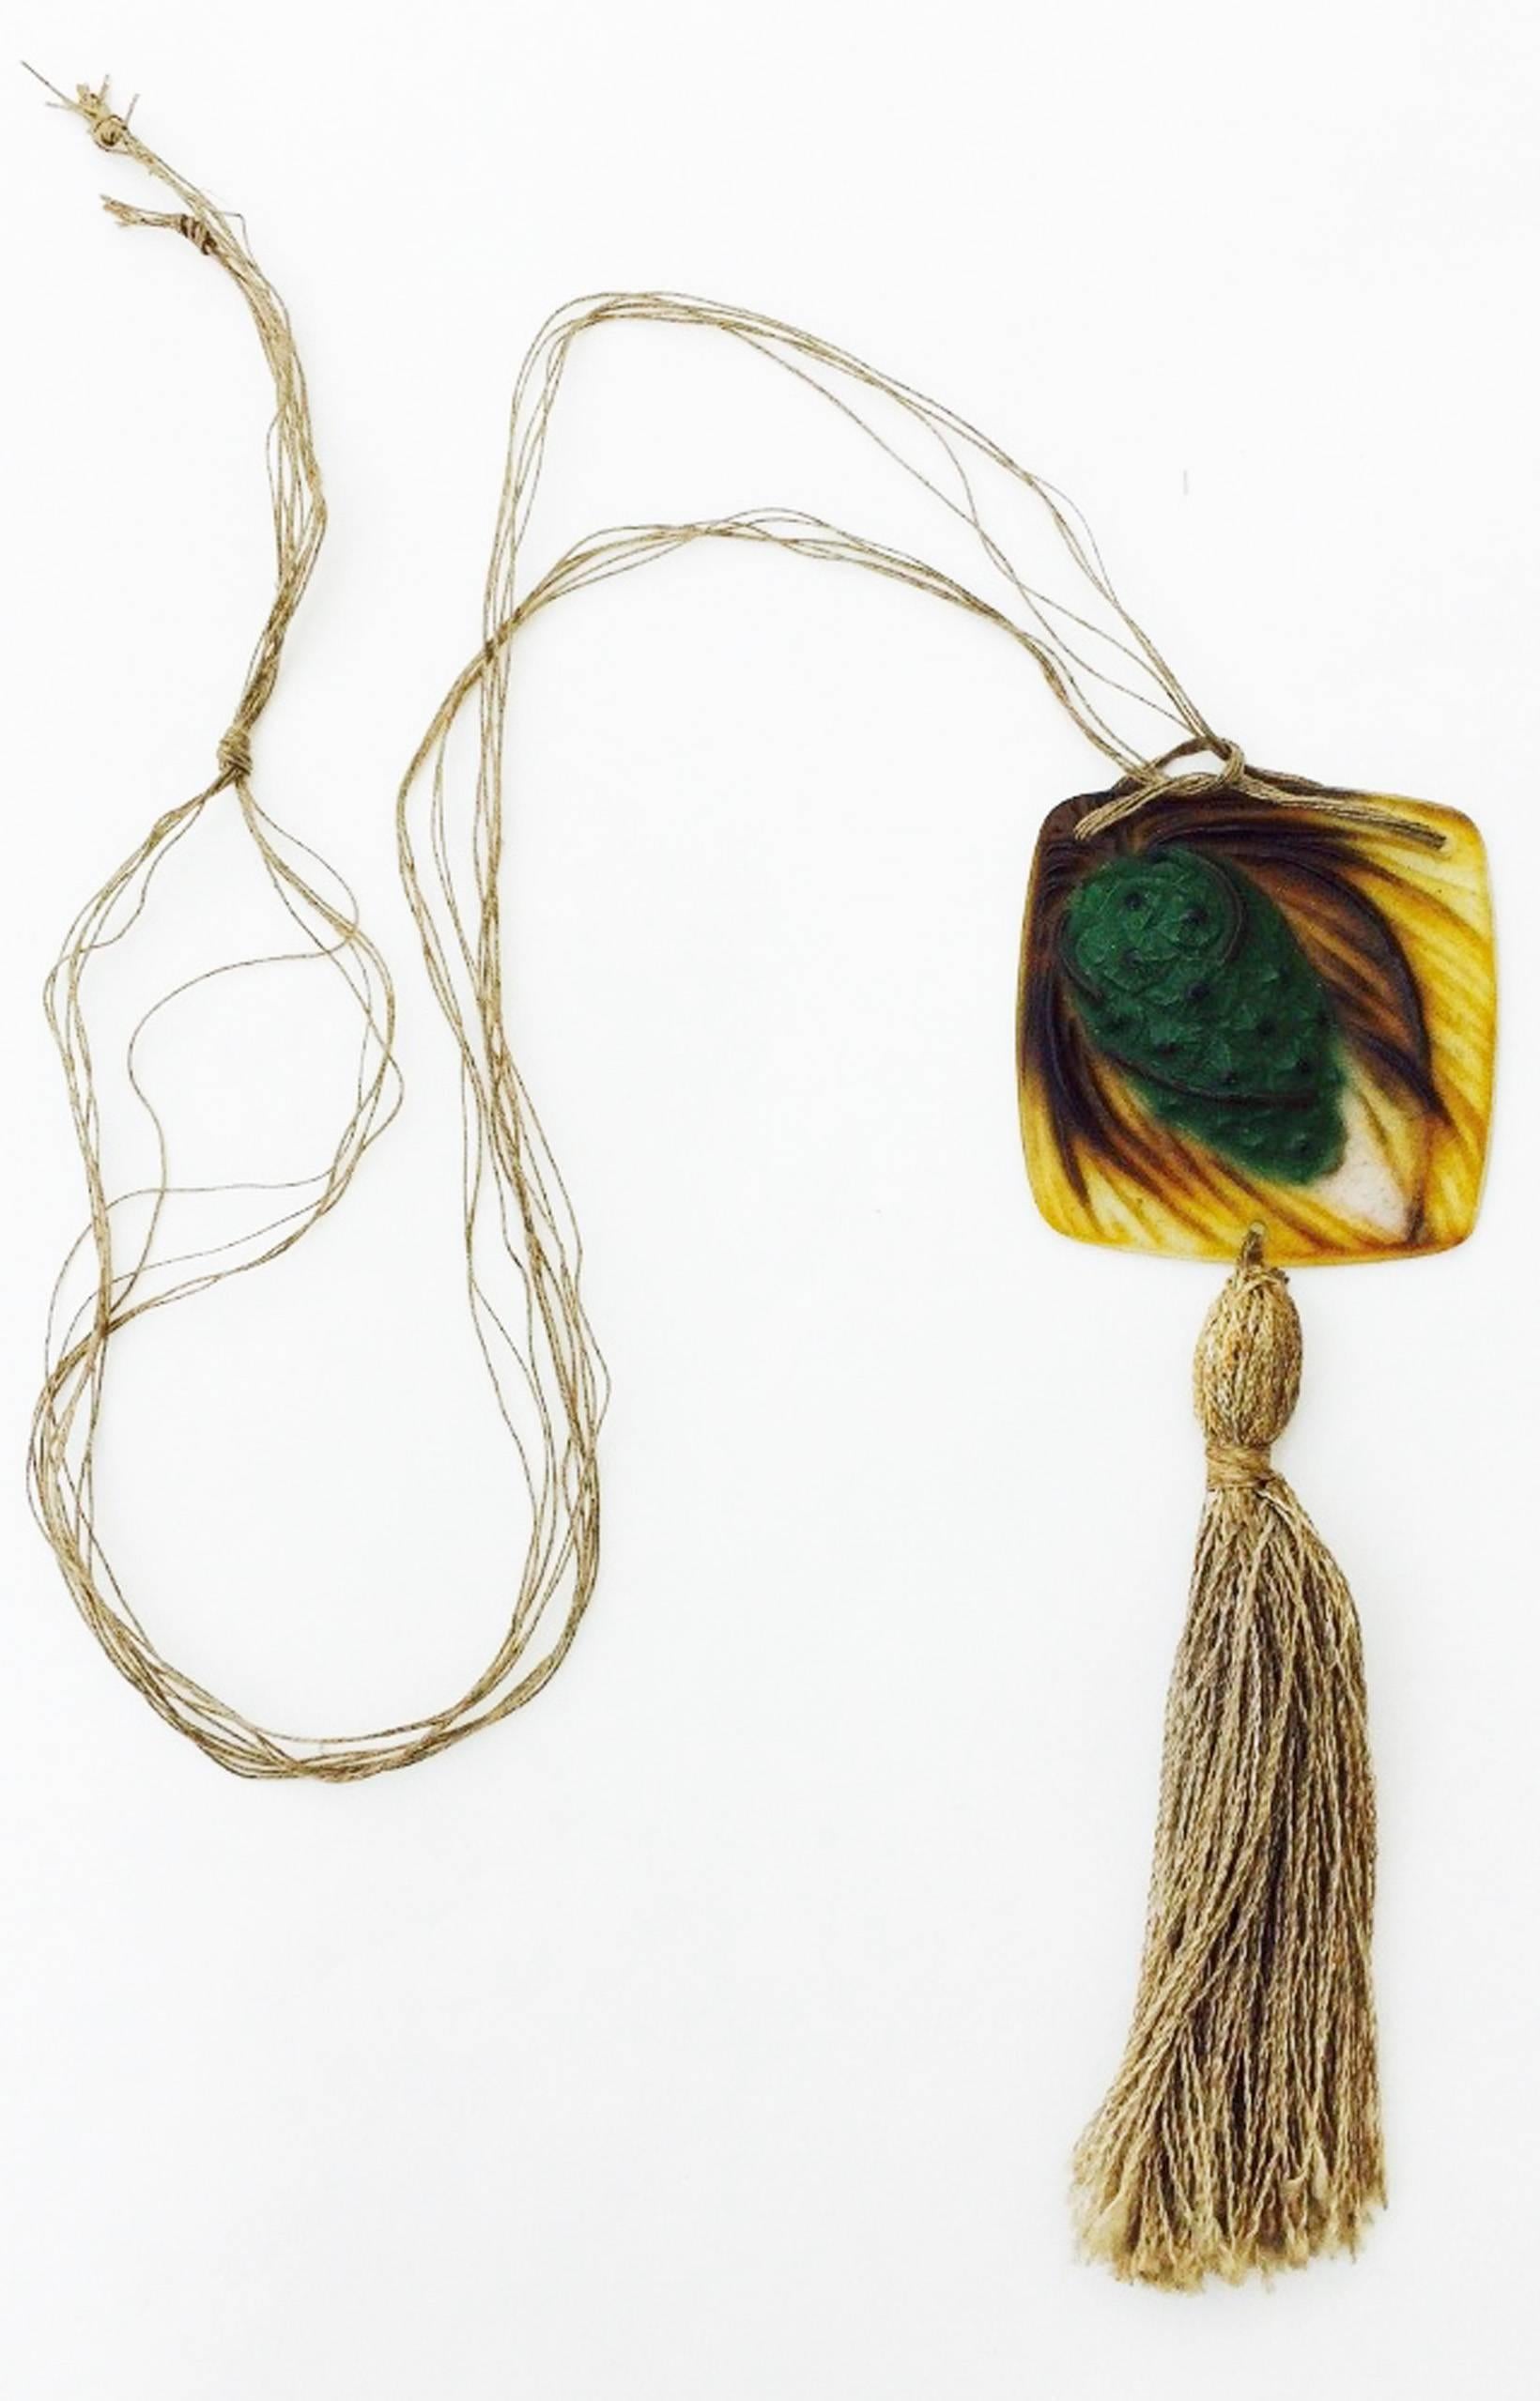 A fine and rare Gabriel Argy-Rosseau pate de verre pendant necklace. Signed and early art deco period item depicts a pinecone and needles and retains original silk cord and tassel. Outstanding design and execution. Glass pendant measures 2